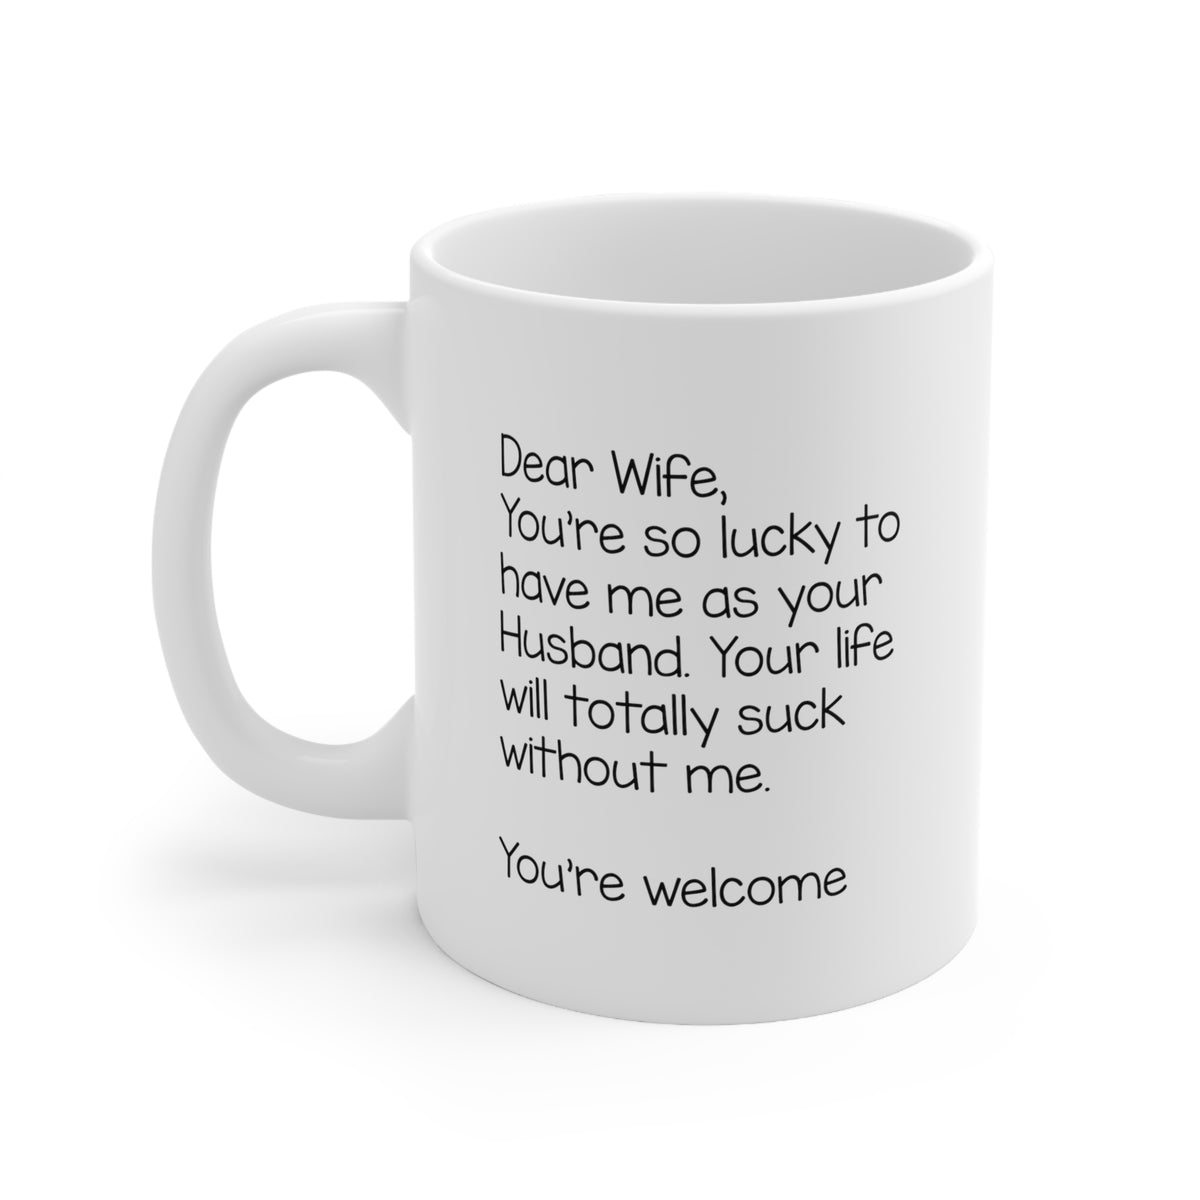 Valentine's Day Coffee Mug - You're so lucky to have me as your Husband - Funny Gifts For Women From Men